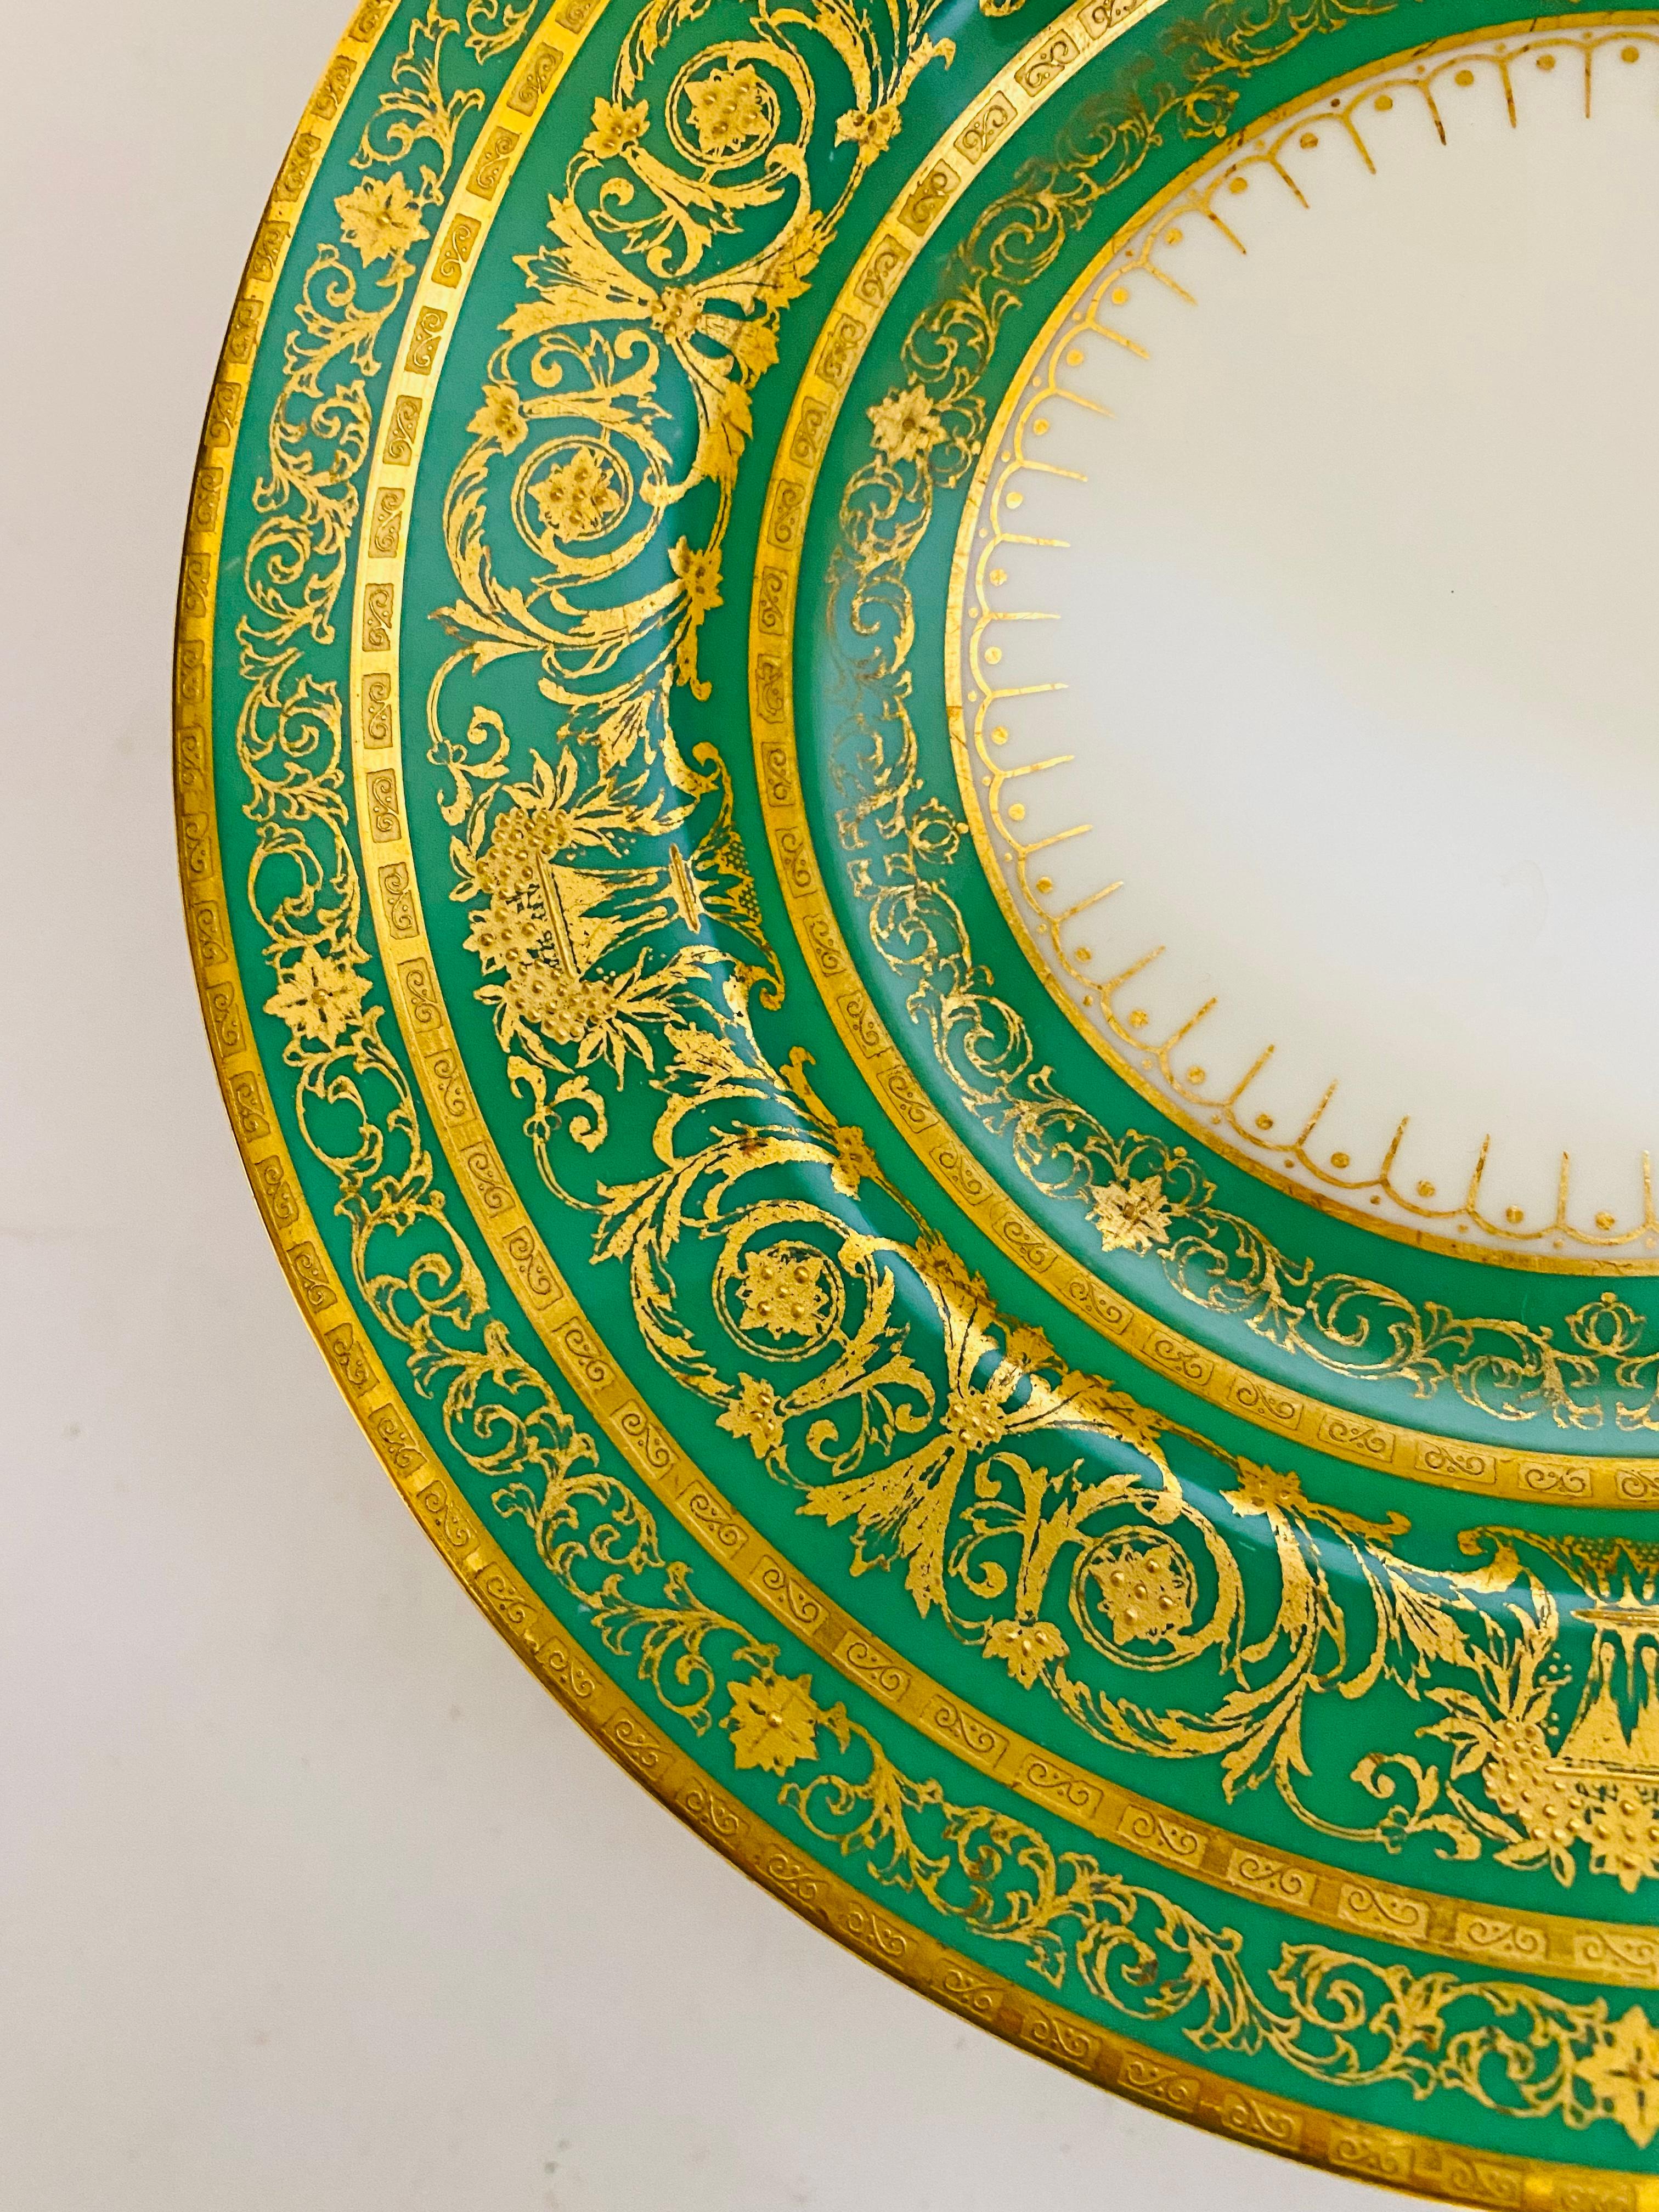 Hand-Crafted Set of 18 Green & Heavily Gilt Encrusted Dessert/Salad Plates Antique English